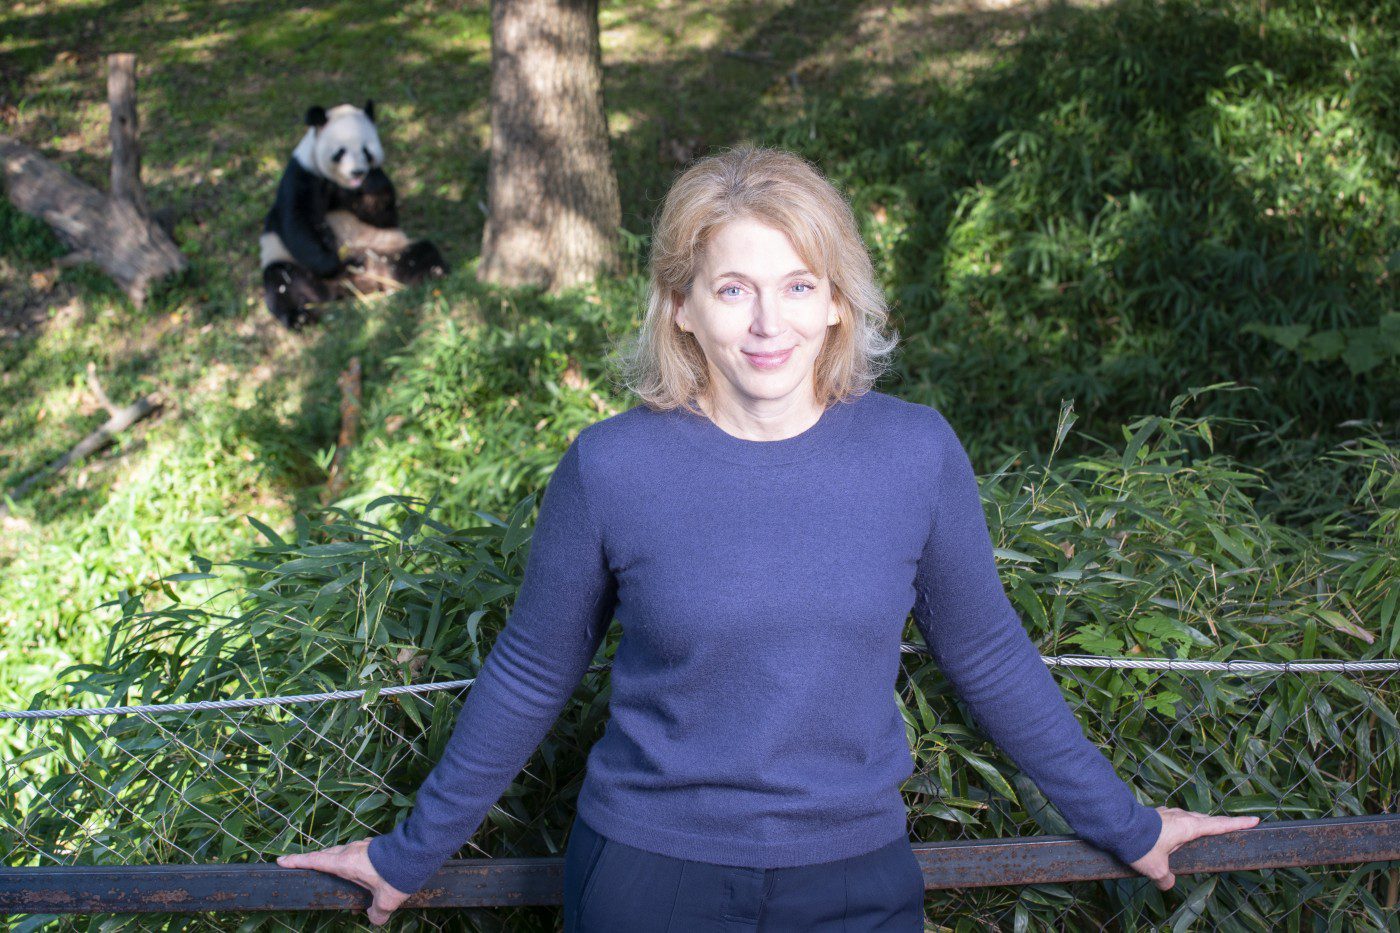 Portrait of Brandie Smith, wearing a blue shirt and standing in front of a panda exhibit at the zoo.